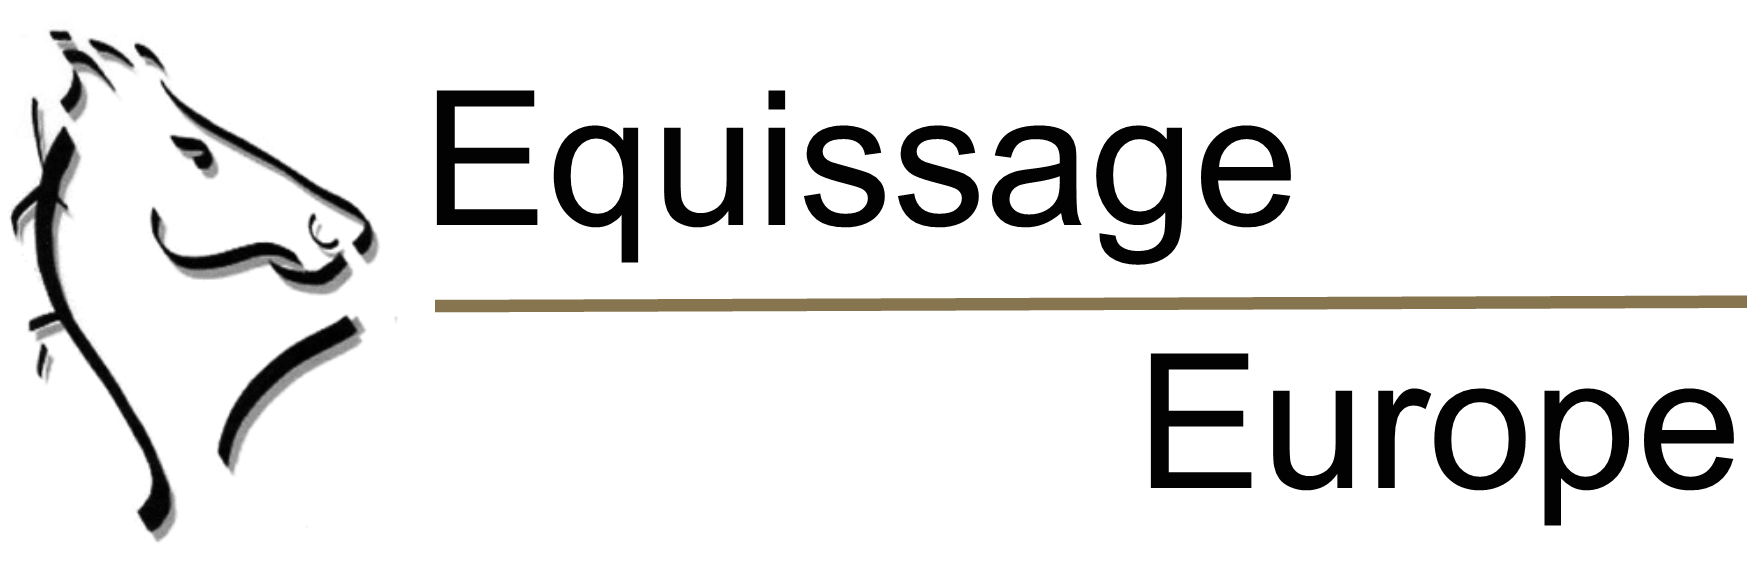 Equissage Europe by WA Designs